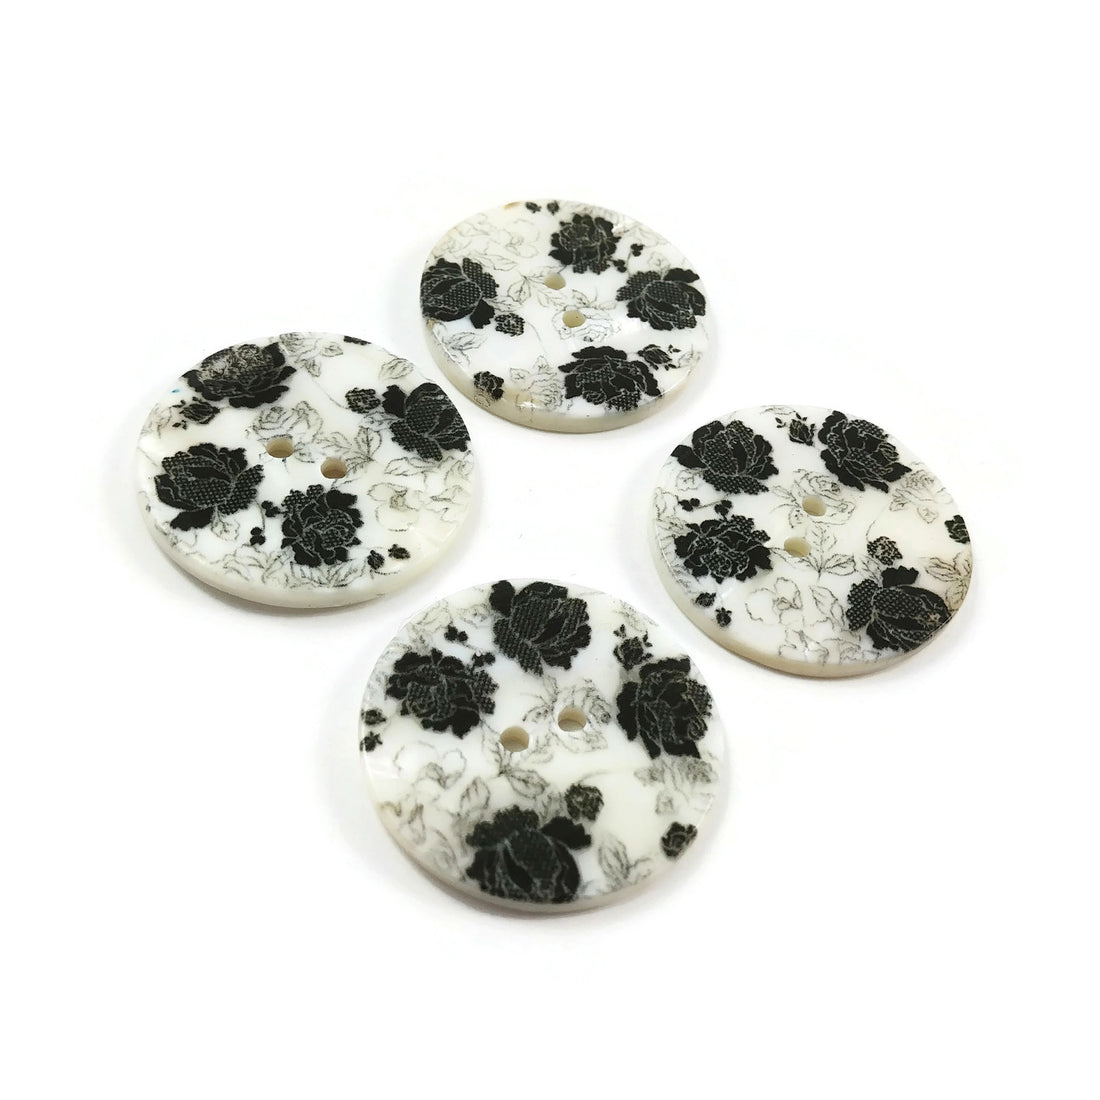 Flower buttons - Mother of Pearl Shell Buttons 30mm - set of 4 eco friendly natural buttons